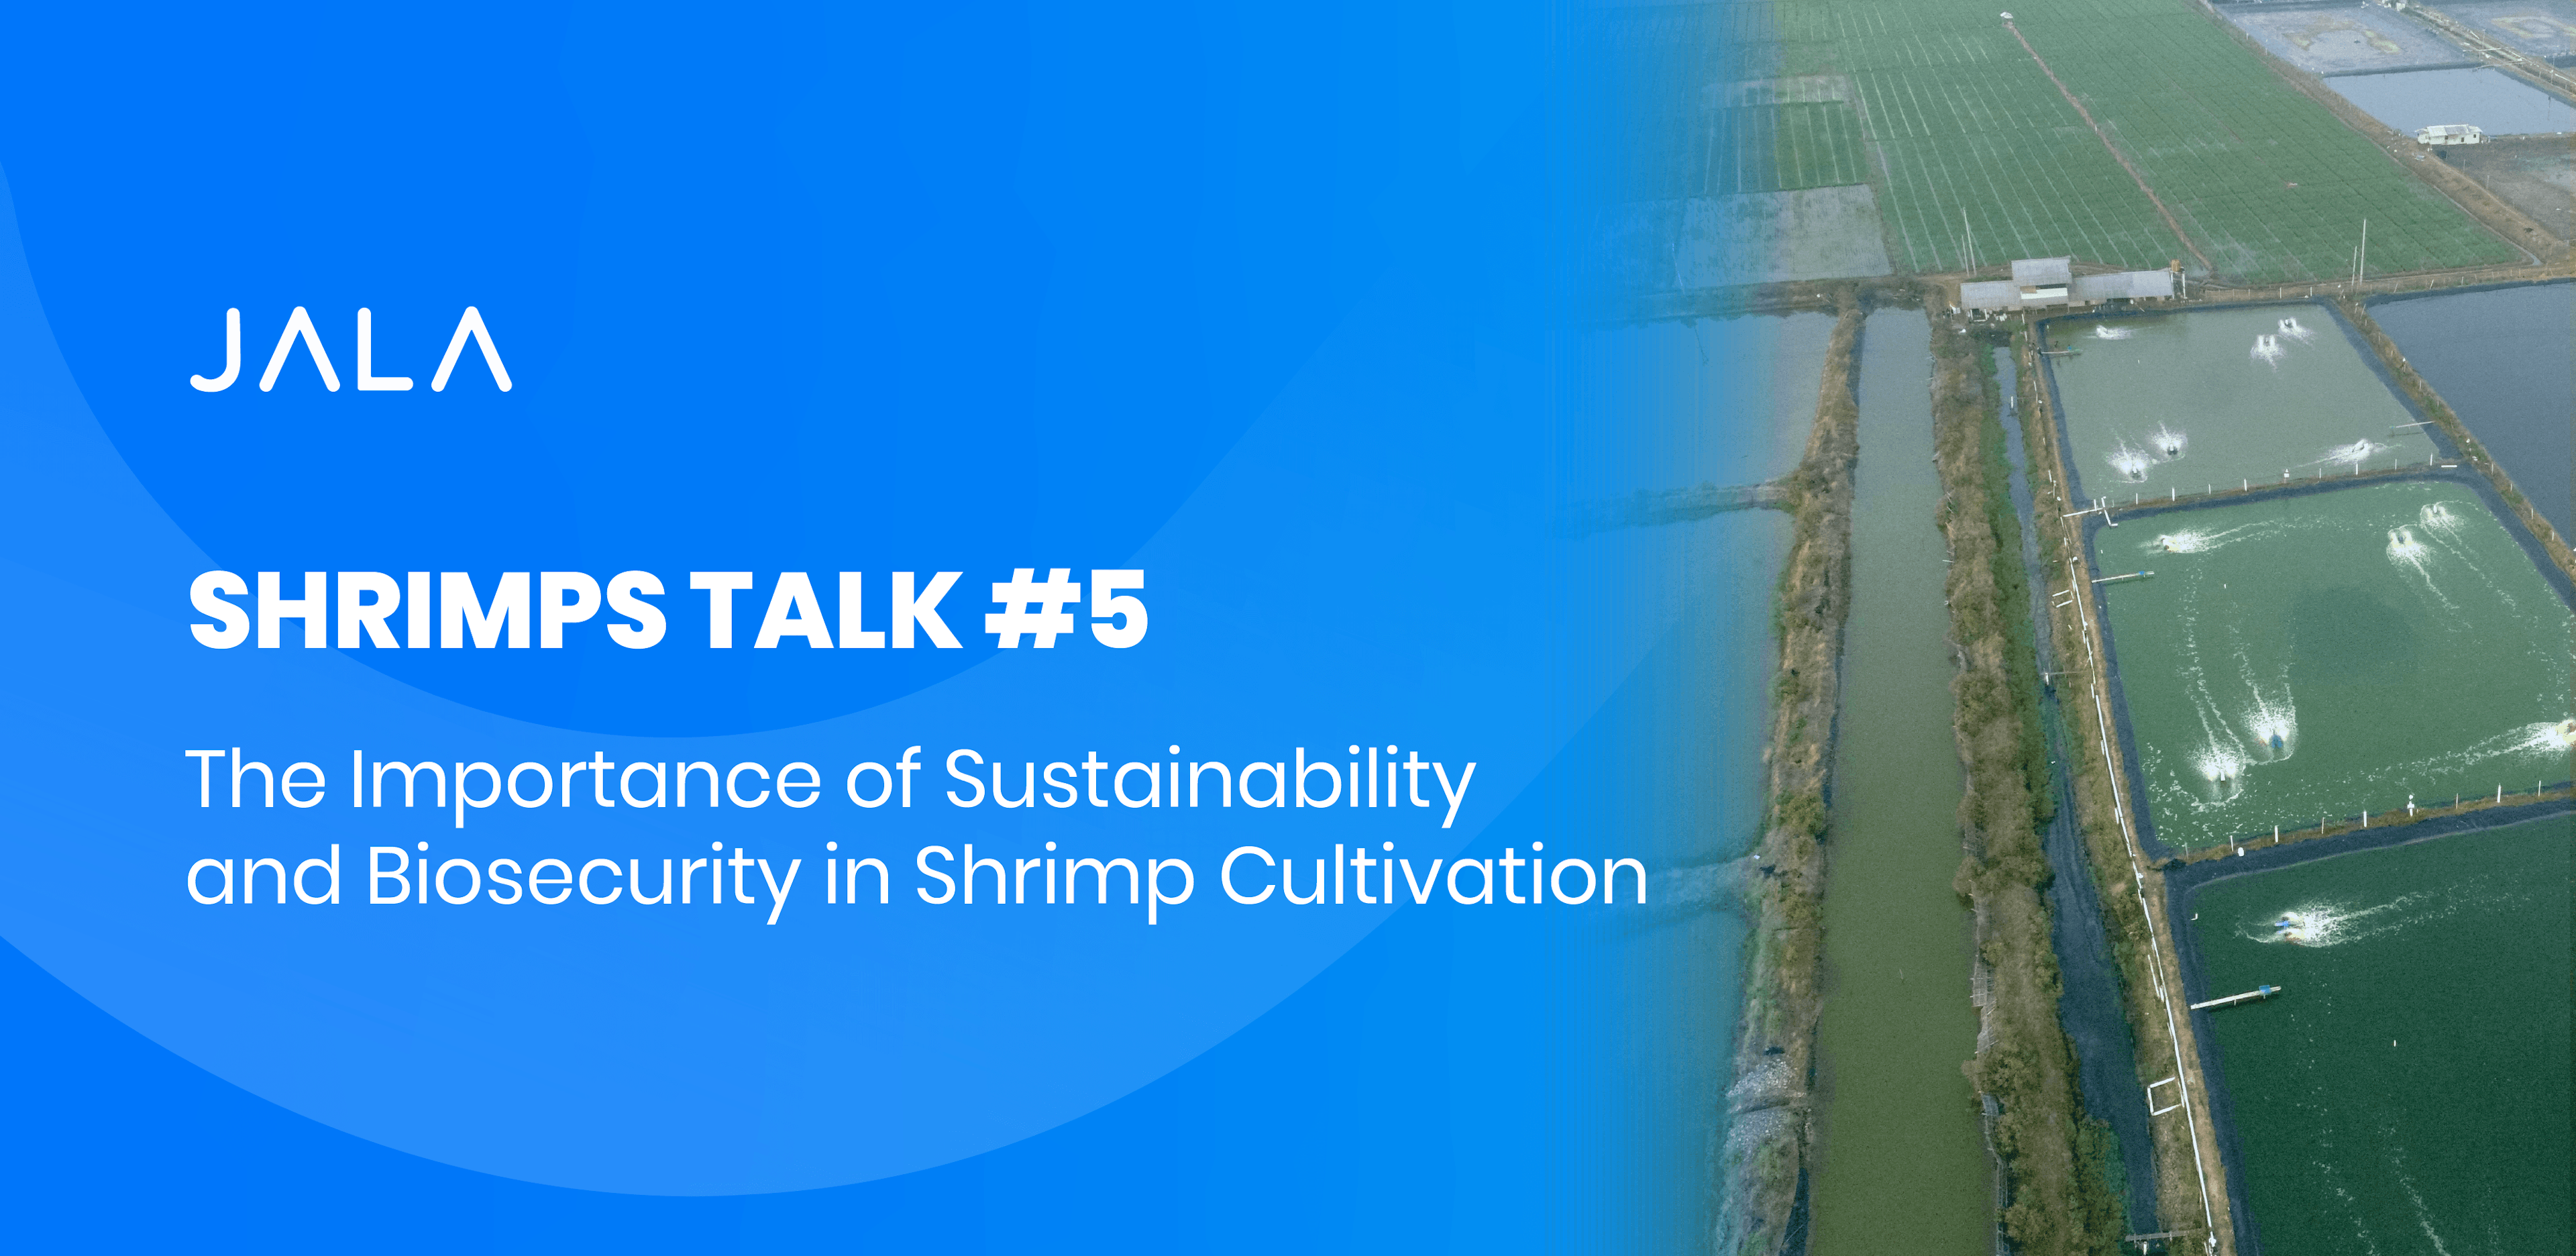 SHRIMPS TALK #5 Emphasized the Importance of Sustainability and Biosecurity in Shrimp Cultivation